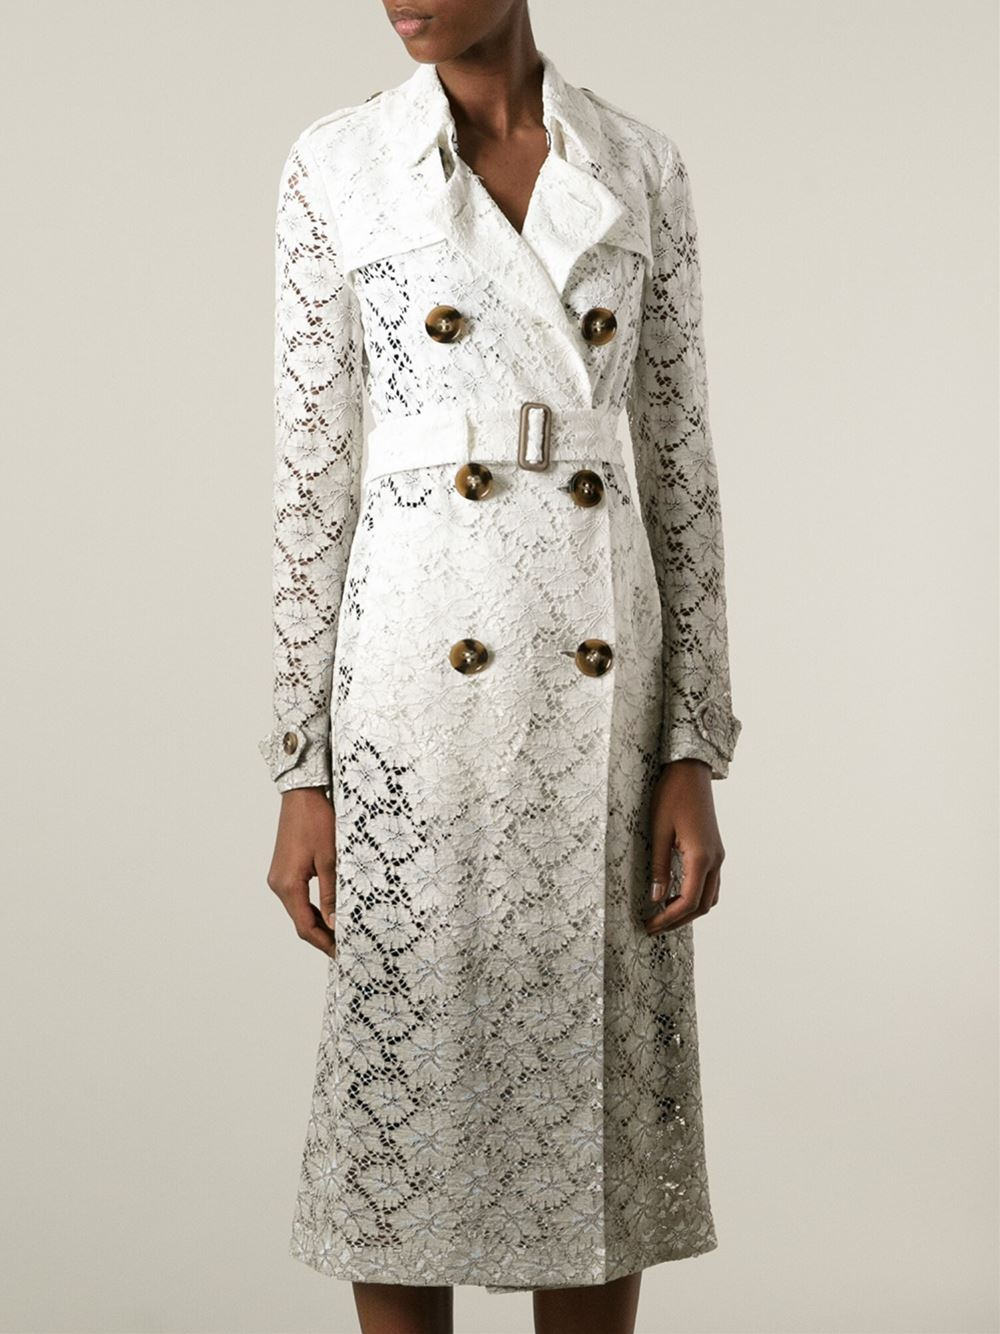 Burberry Prorsum Lace Trench Coat in White | Lyst